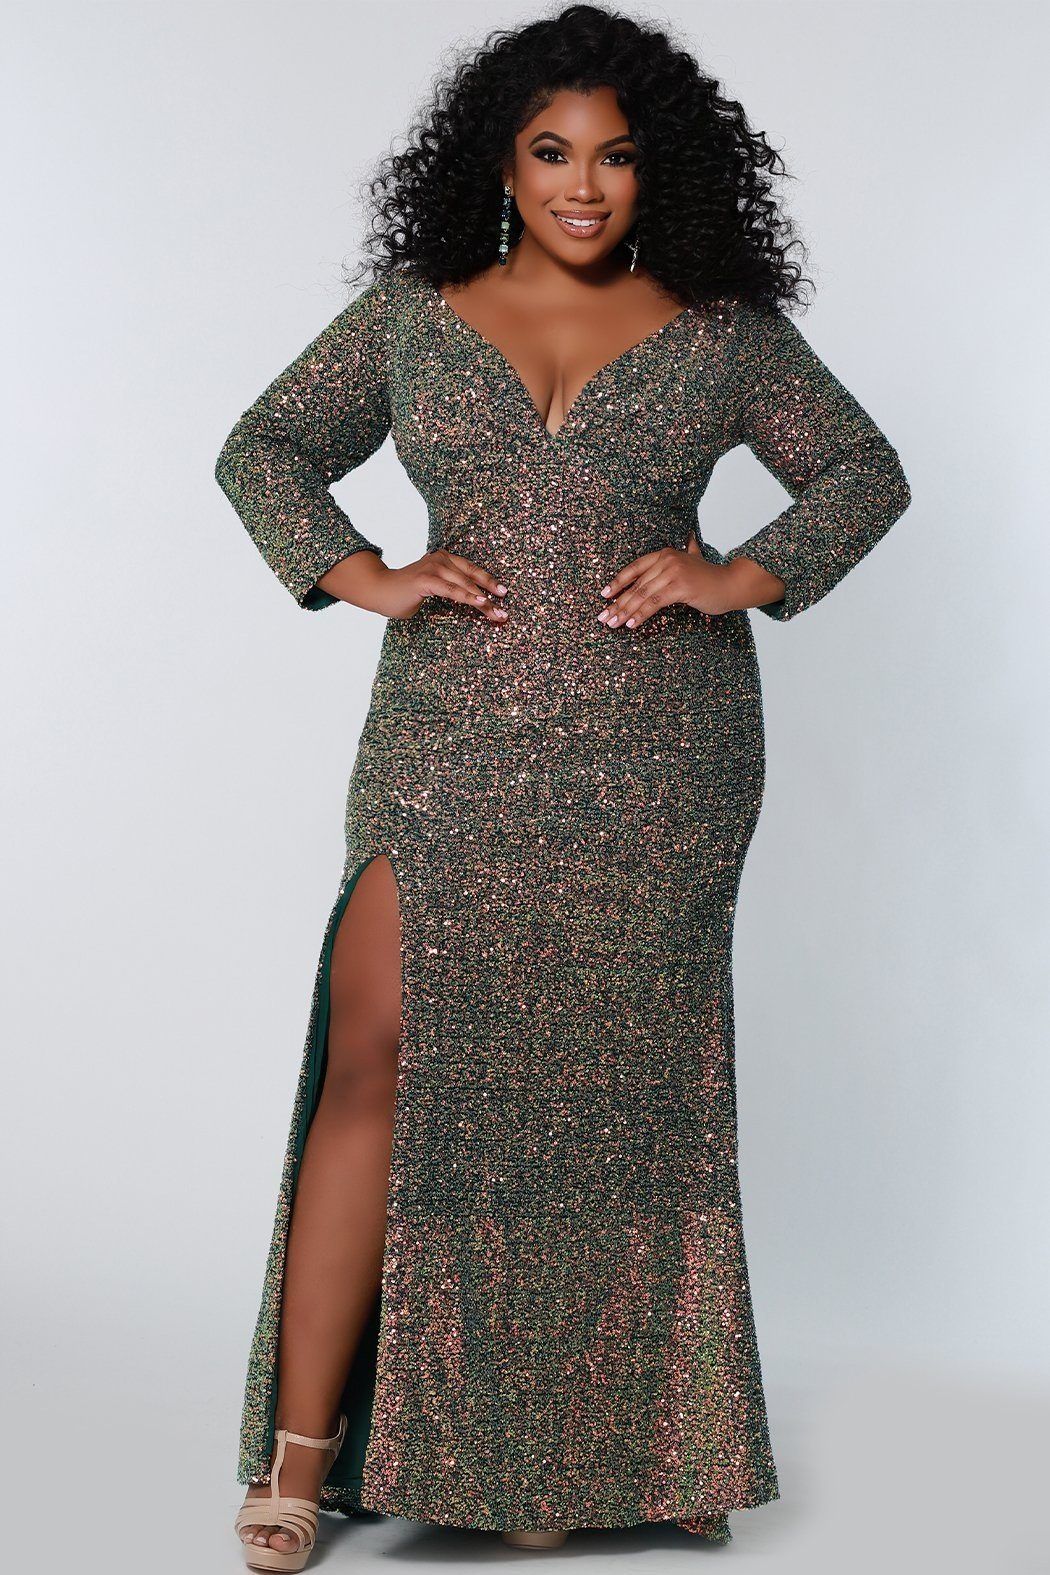 Style SC7333 Sydney's Closet Plus Size 24 Sequined Green Side Slit Dress on Queenly